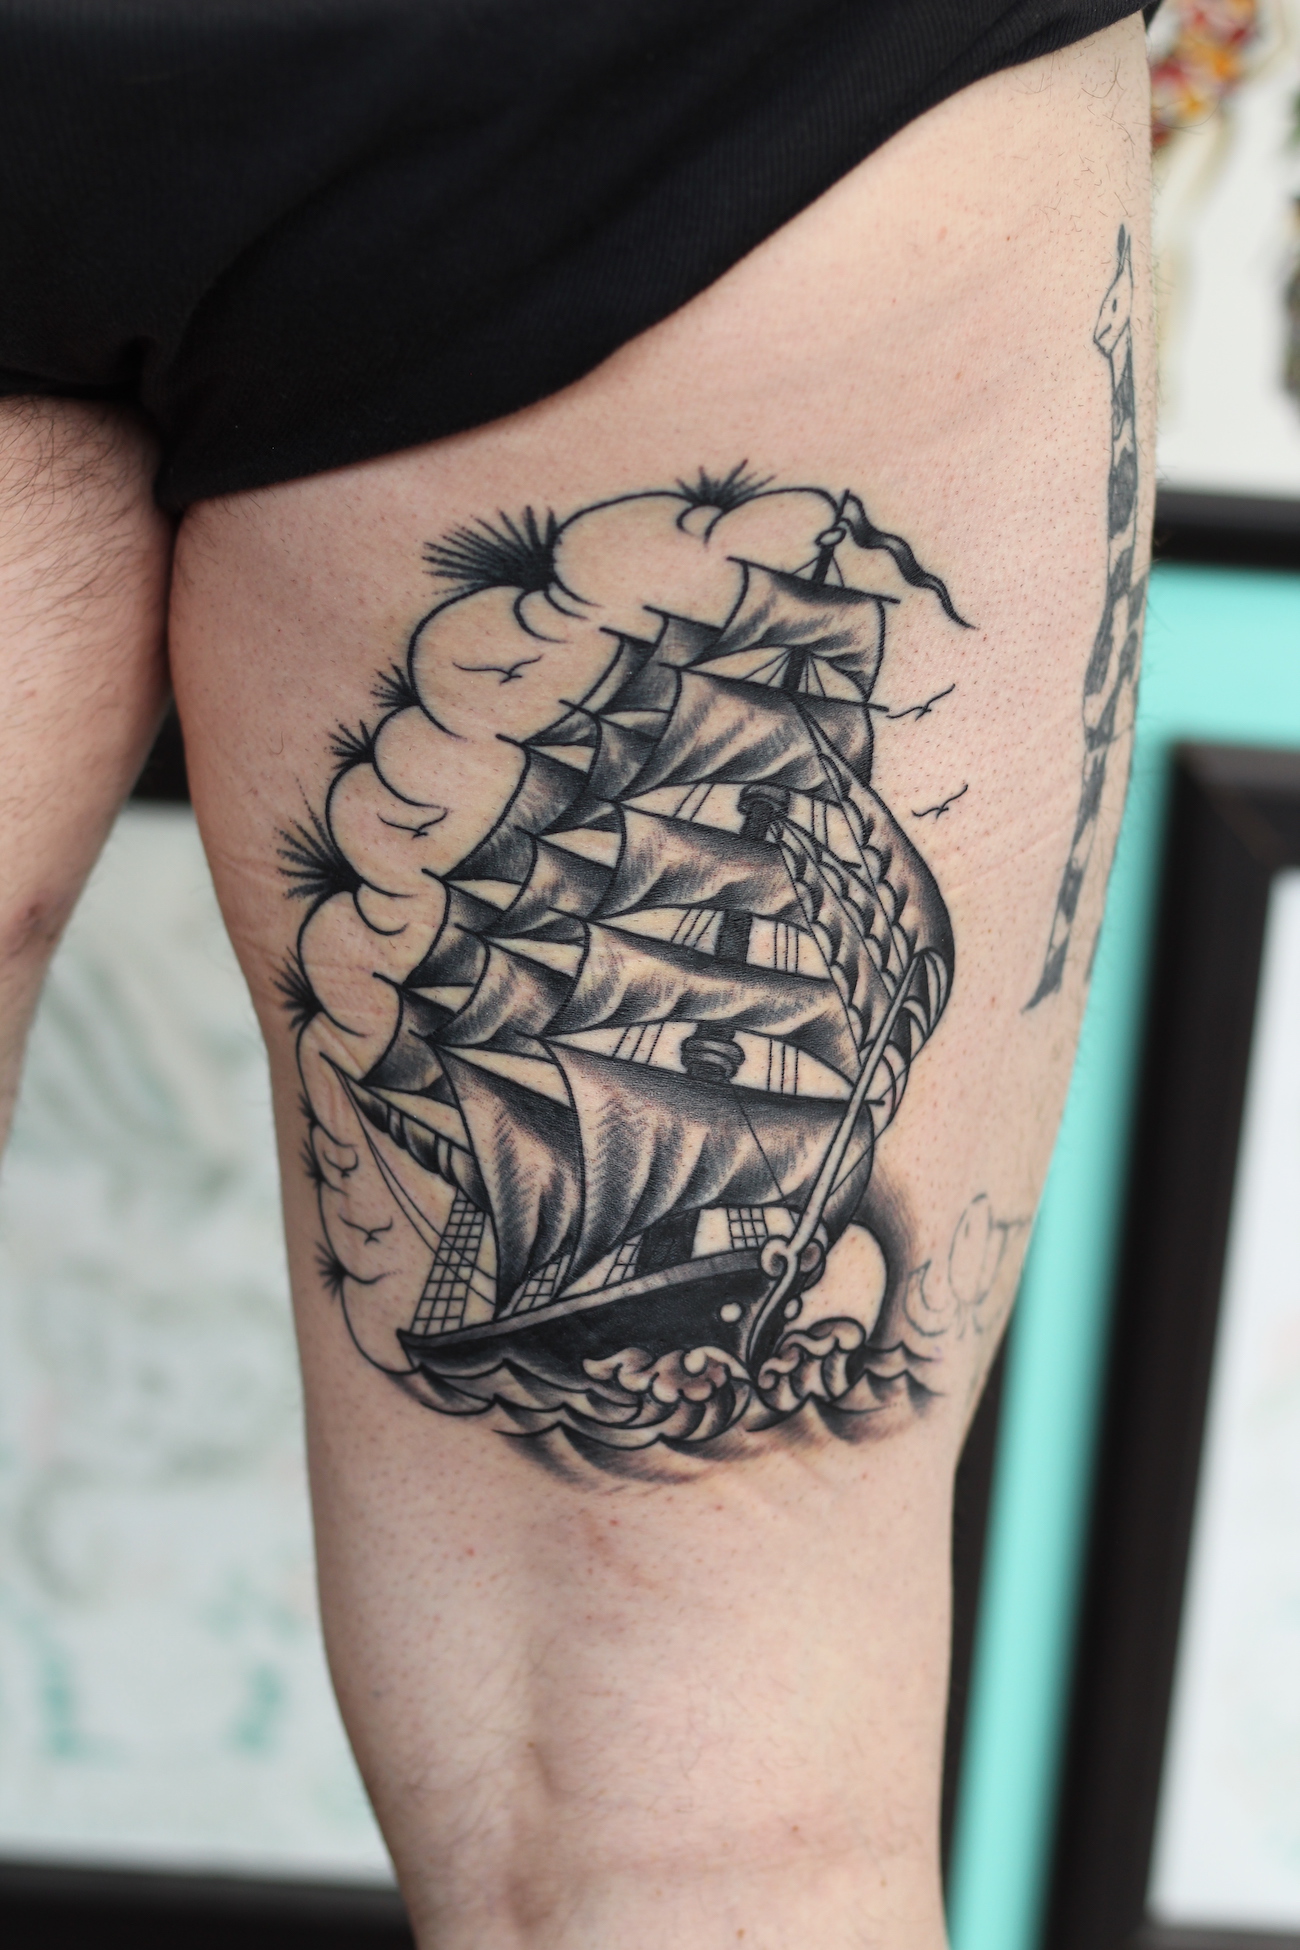 Clipper ship tattooed in the American Traditional style. Made at Denver's finest Dedication Tattoo.